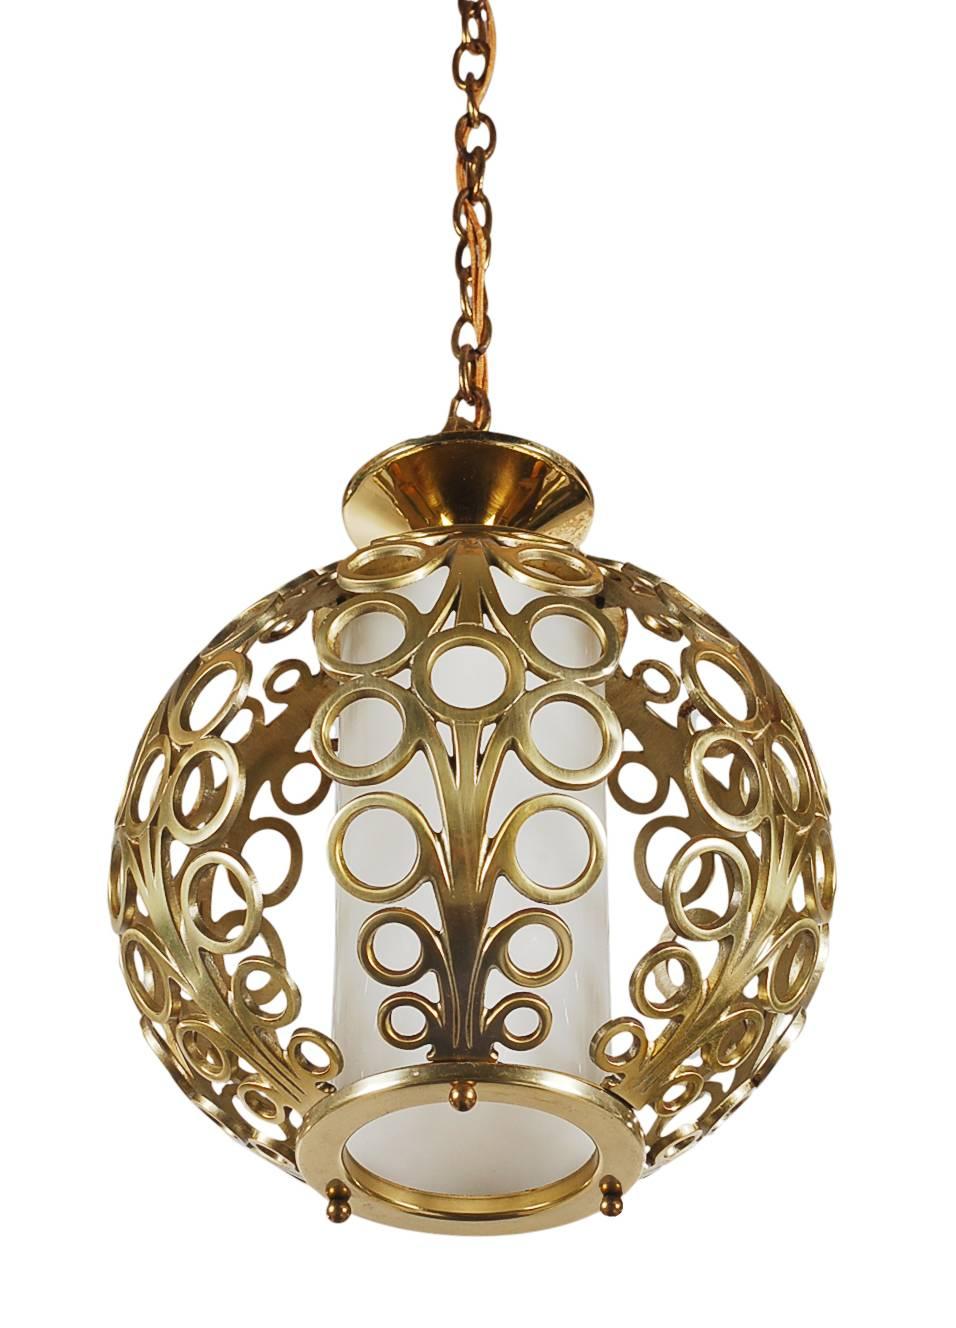 A beautifully designed brass pendant lamp circa 1960's. It features solid brass construction with a glossy milk glass center diffuser. Tested, working, and ready for immediate use. 

In the style of: Tommi Parzinger, James Mont, Dorothy Draper